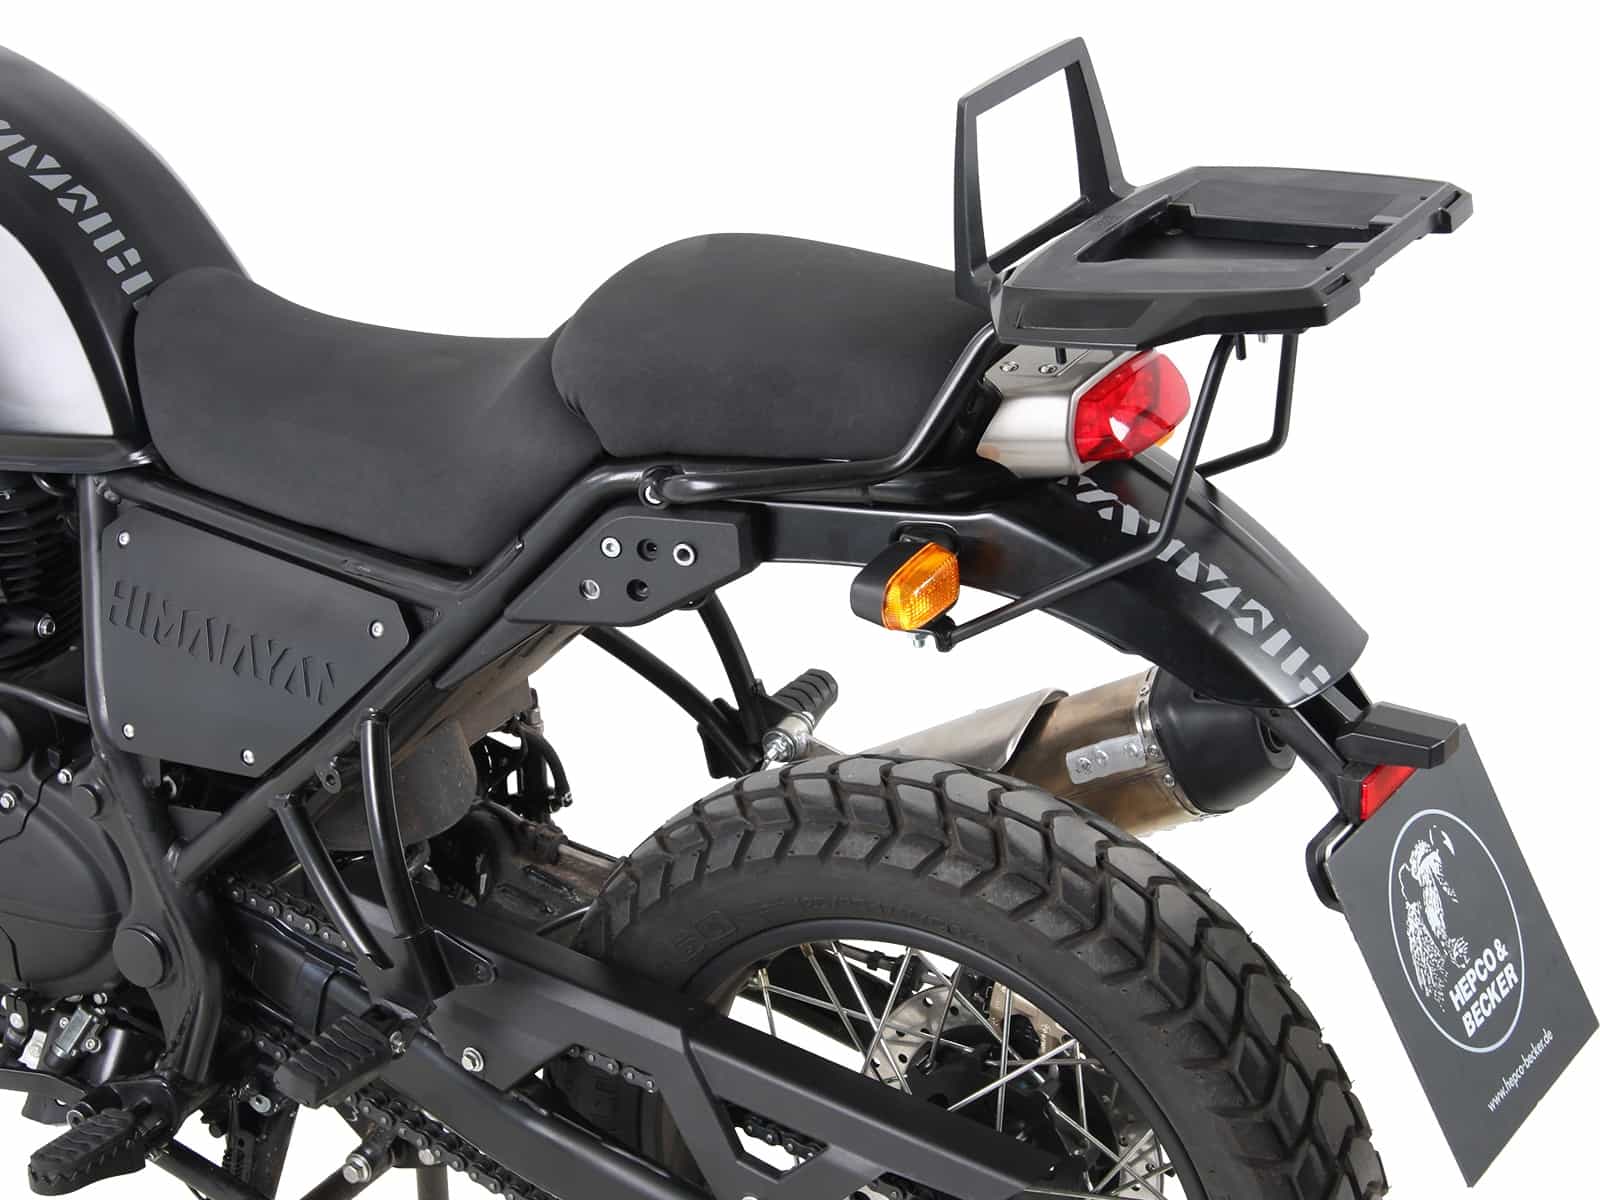 Alurack top case carrier black for combination with original rear rack for Royal Enfield Himalayan (2018-2020)